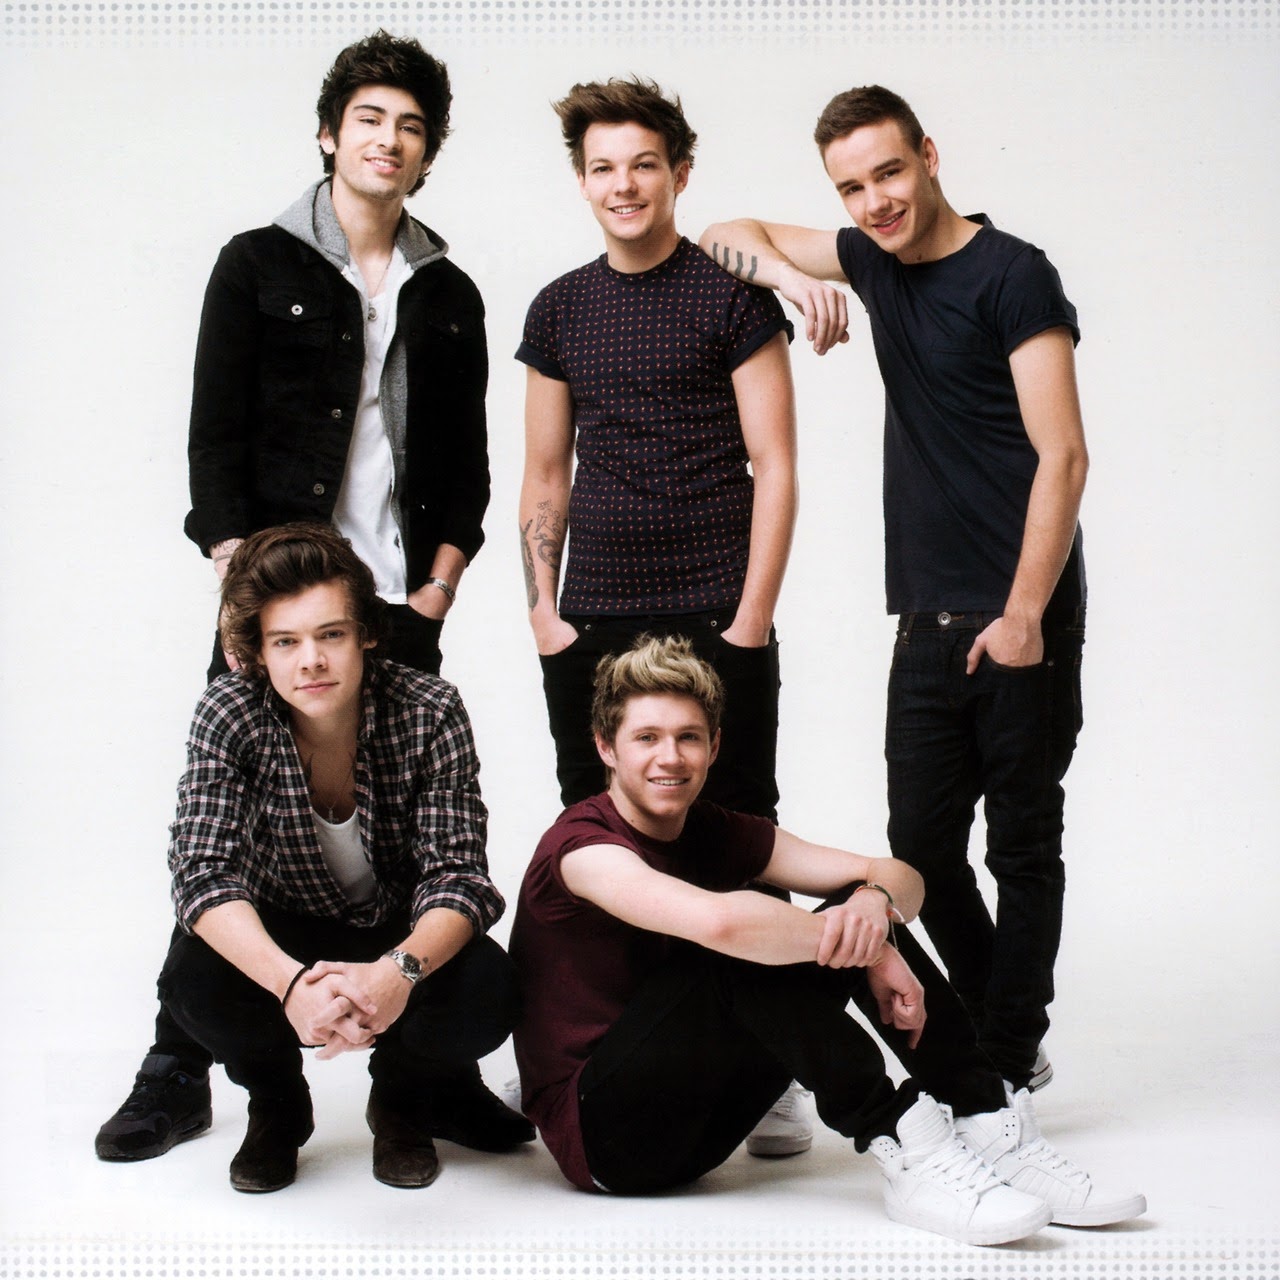 One Direction Wallpaper For Phone All Sizes